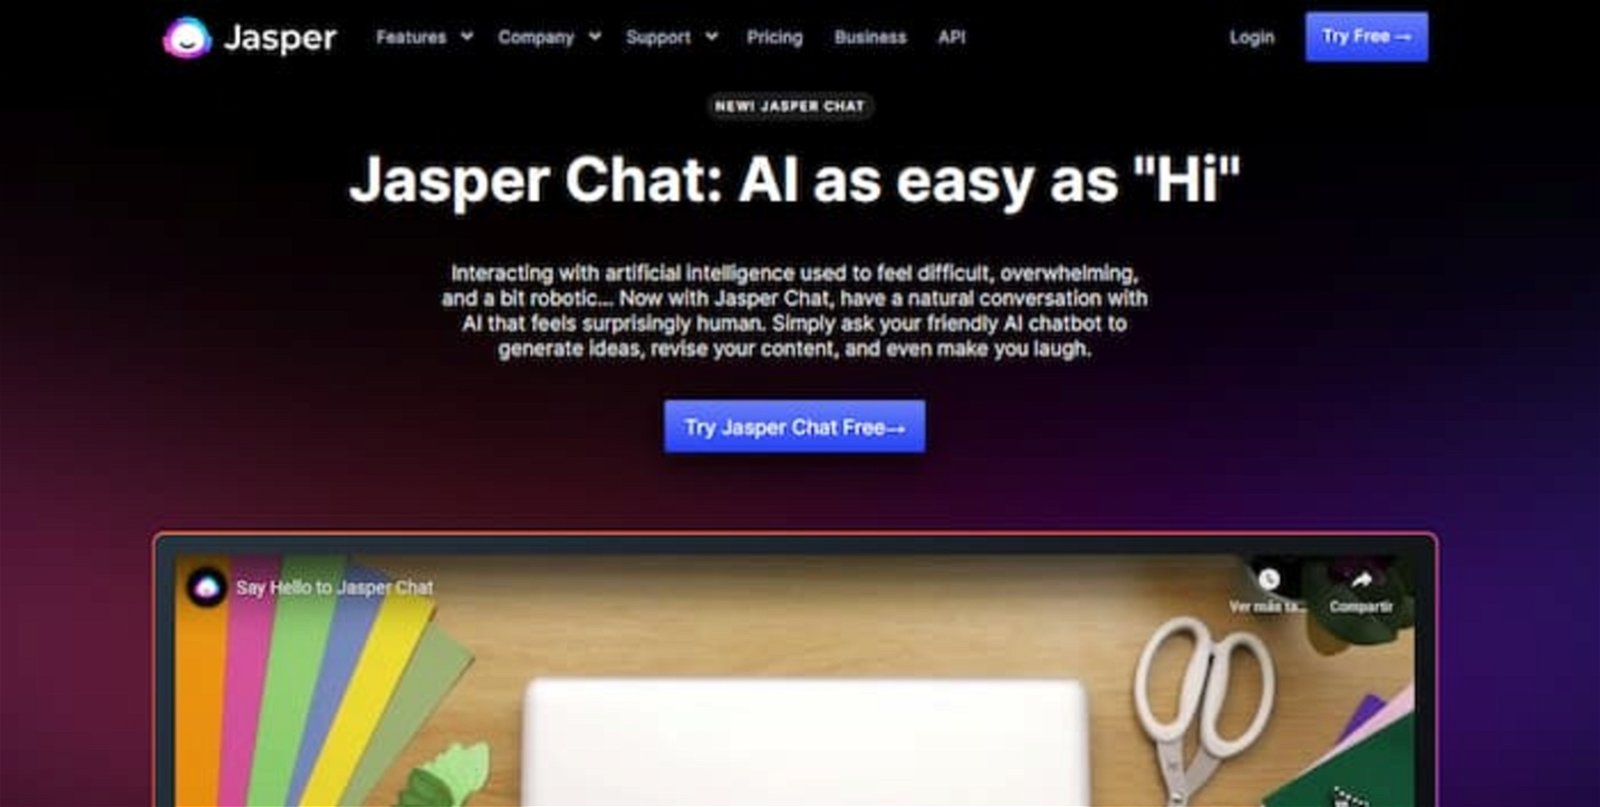 Jasper is a very powerful AI that can generate texts specialized in SEO and positioning